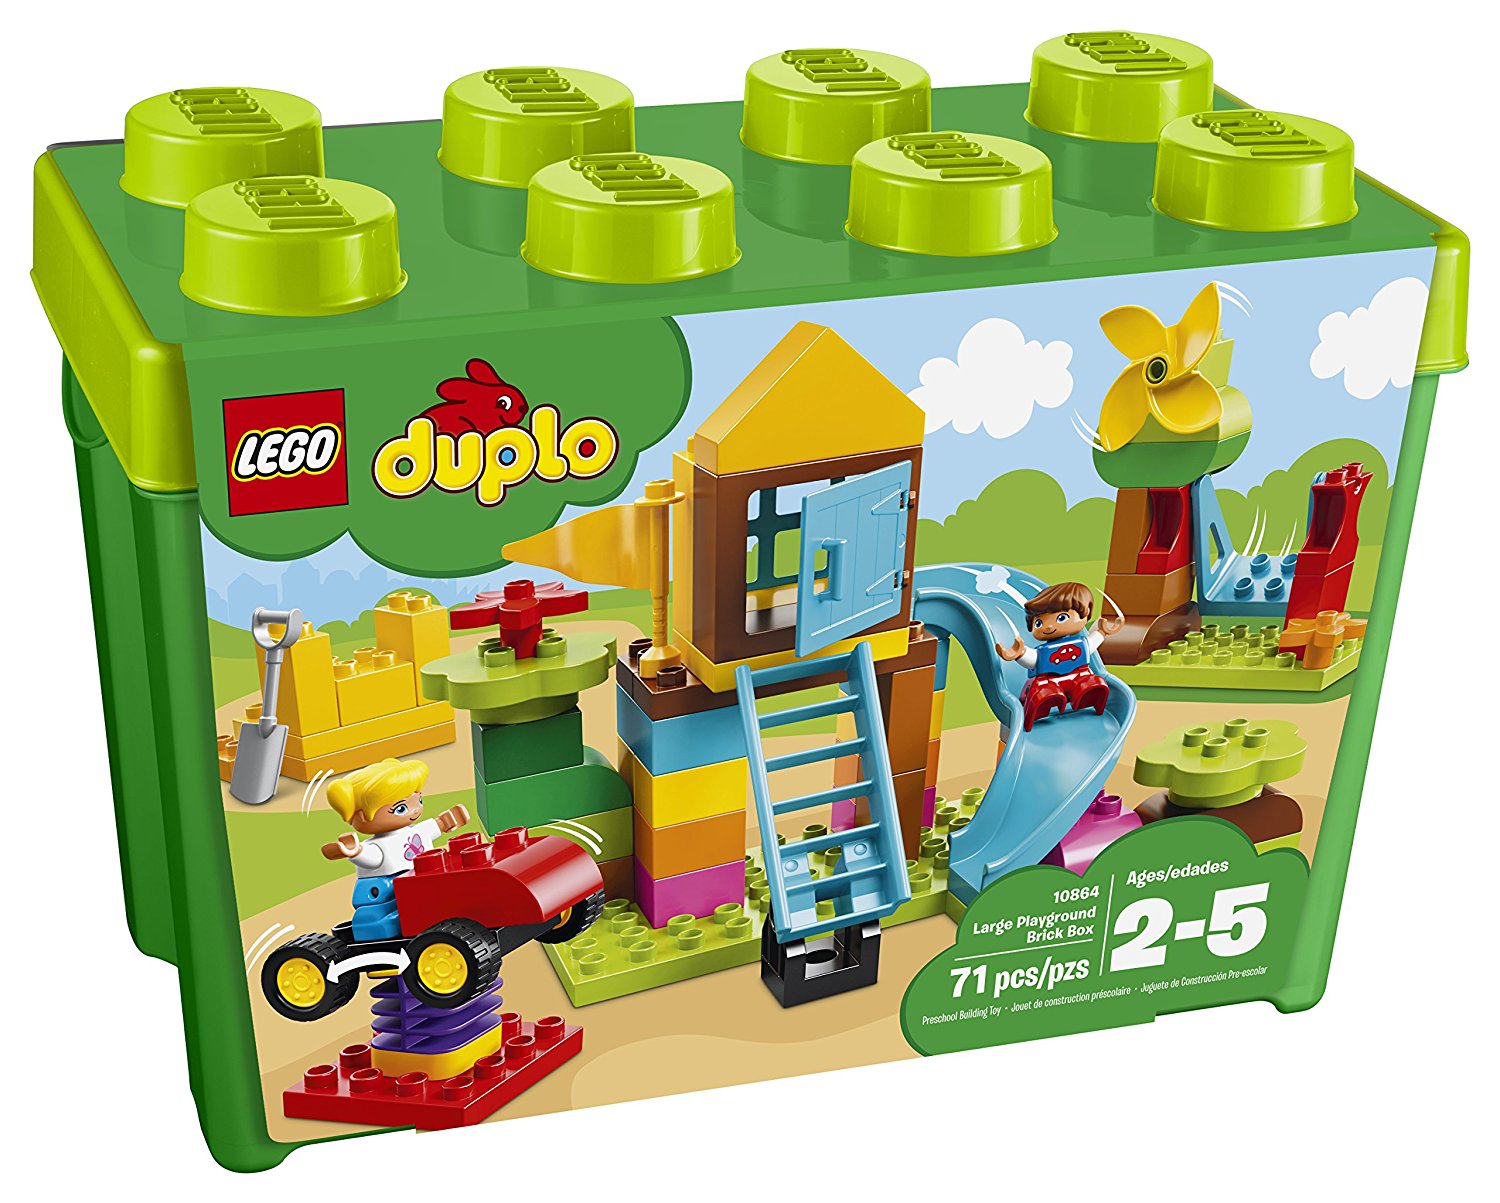 My First – Large Playground Brick – Toys Gifts